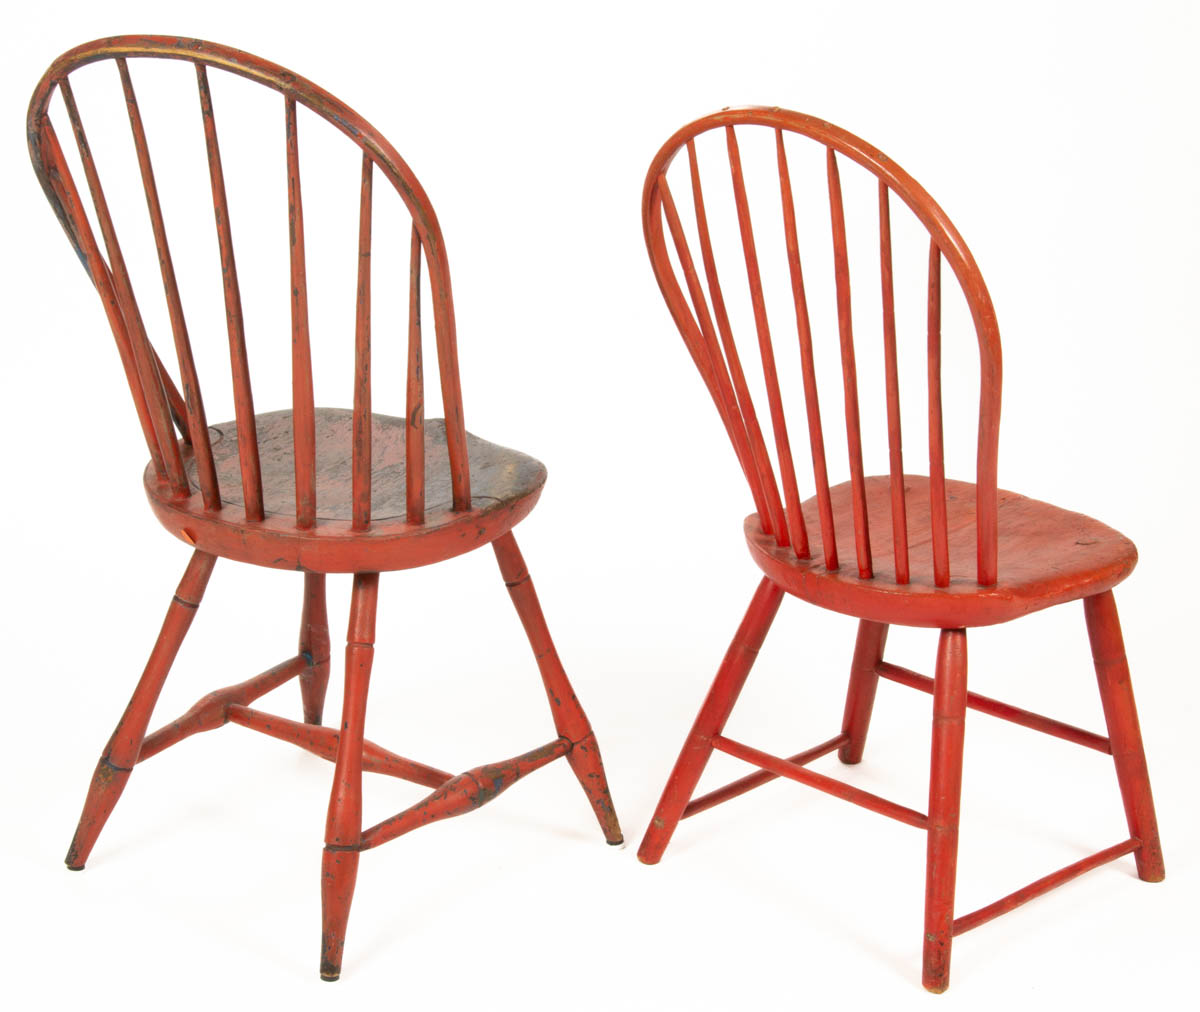 AMERICAN PAINTED WINDSOR BOW-BACK SIDE CHAIRS, LOT OF TWO